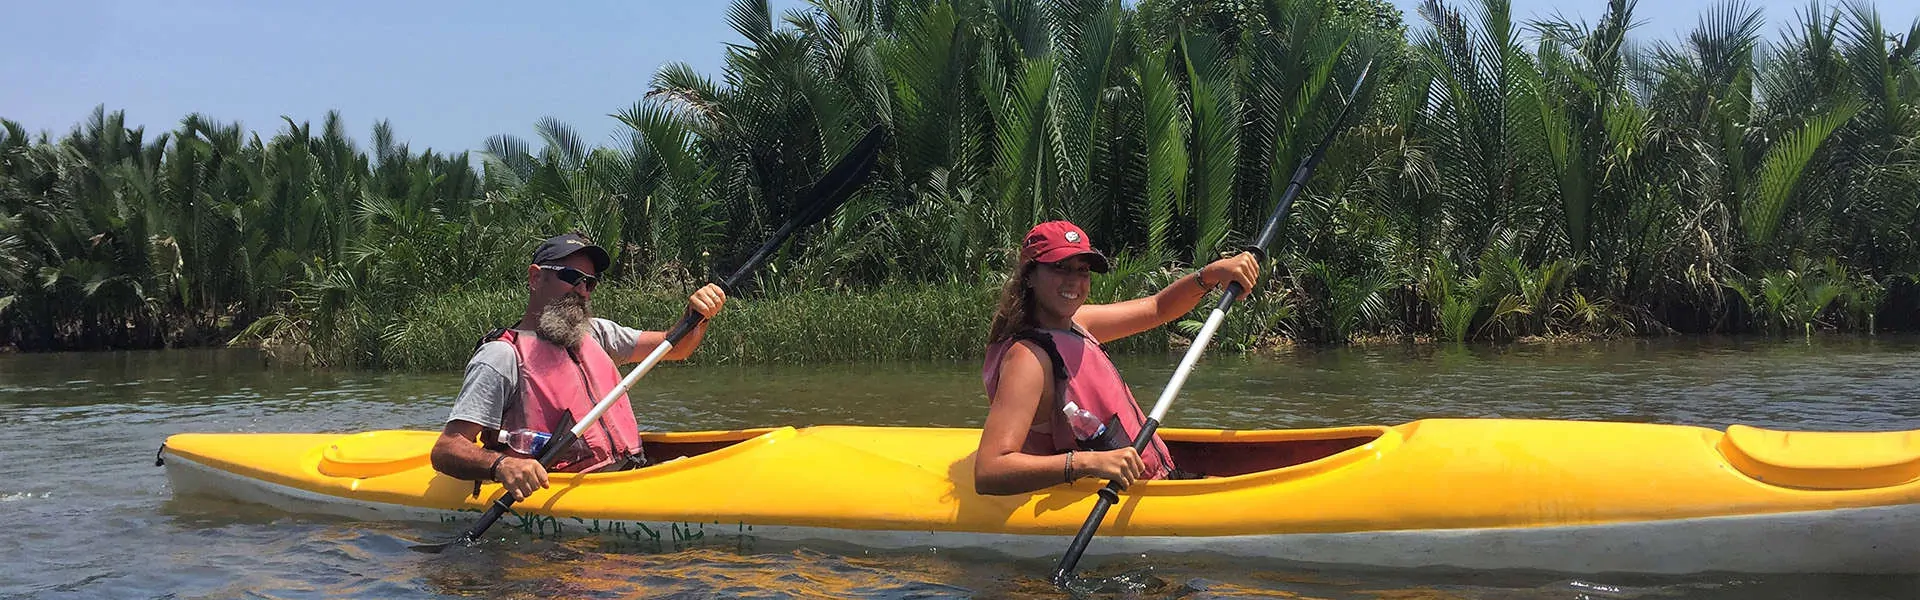 Half-day Hoi An Tour by Cycling and Kayaking